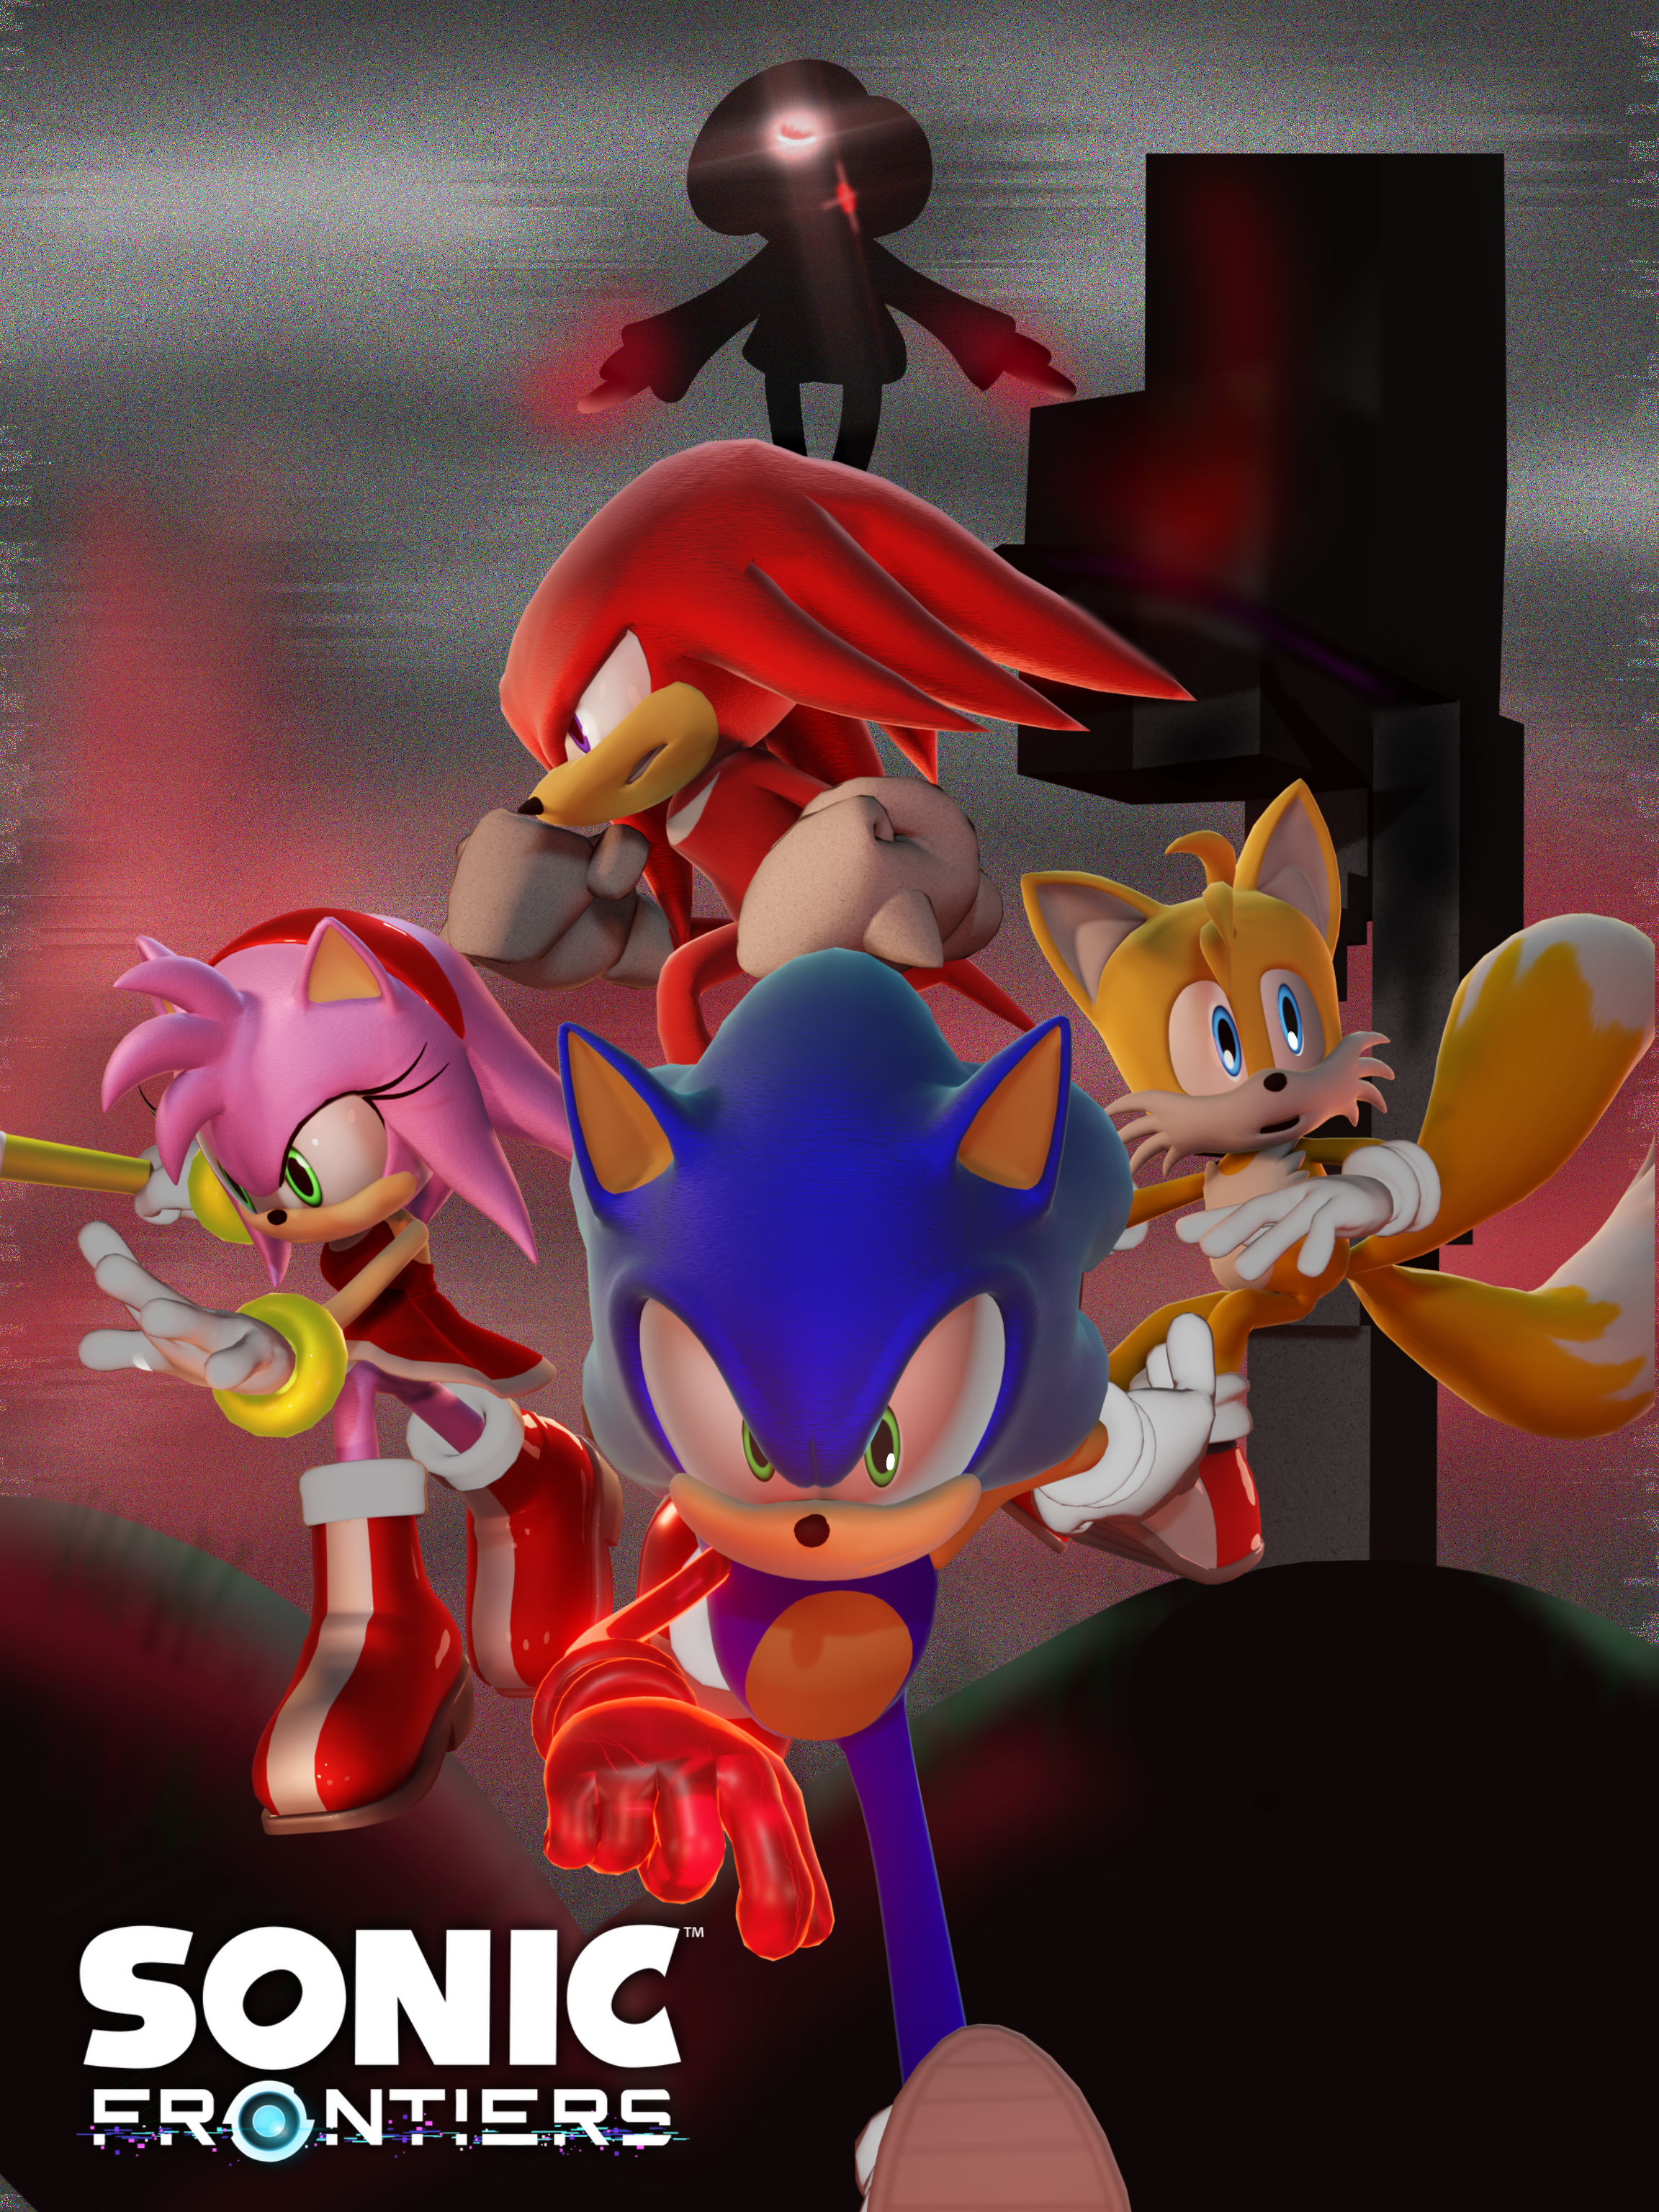 The End (Sonic Frontiers) by Hexsmasher on DeviantArt